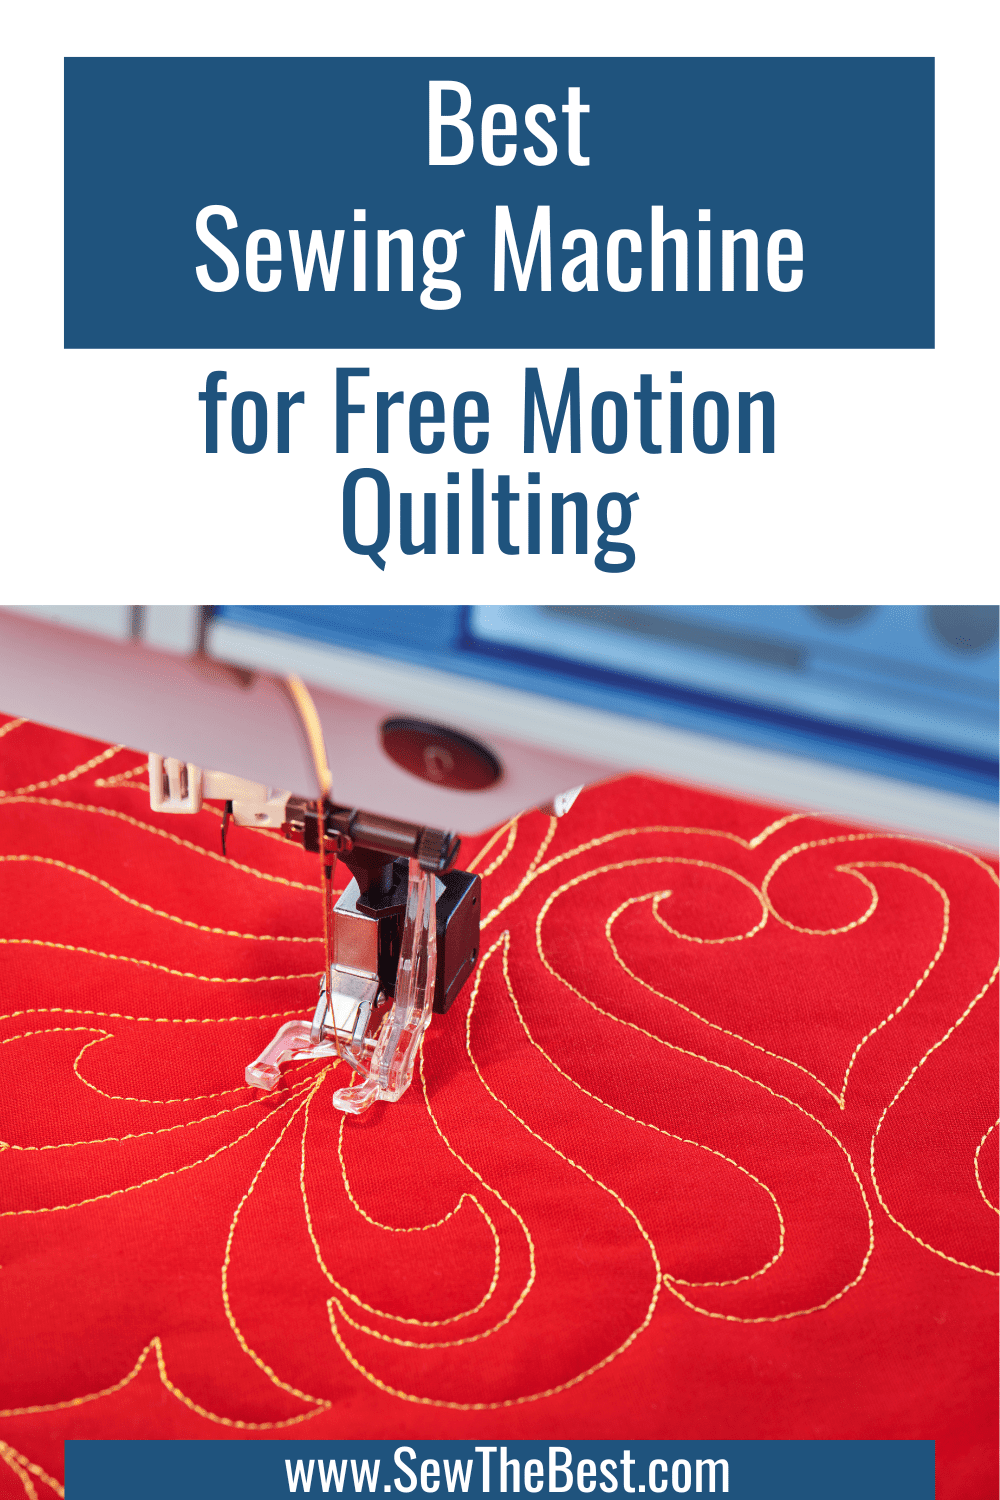 Best Sewing Machine for Free Motion Quilting - picture of sewing machine quilting follows.